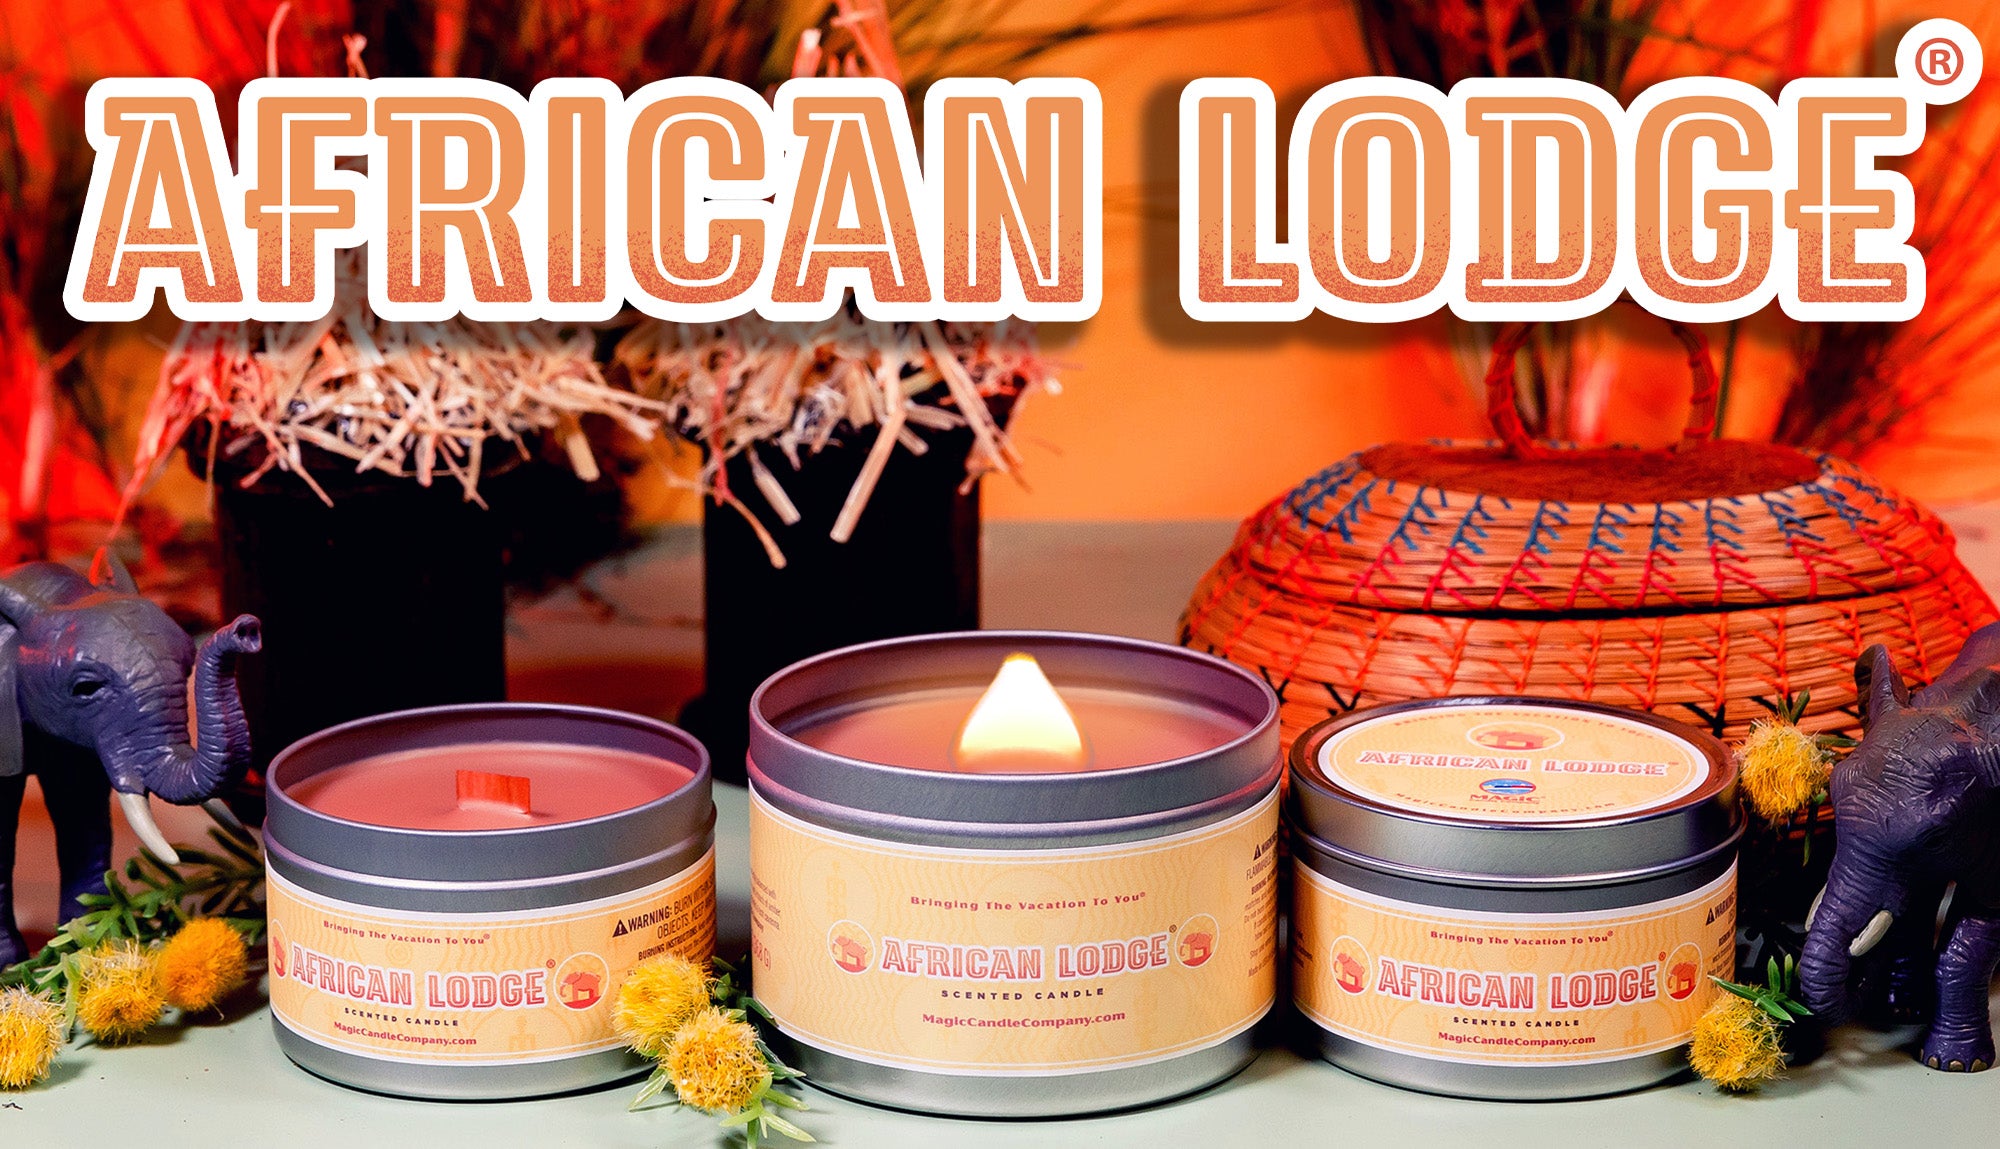 African Lodge Fragrance